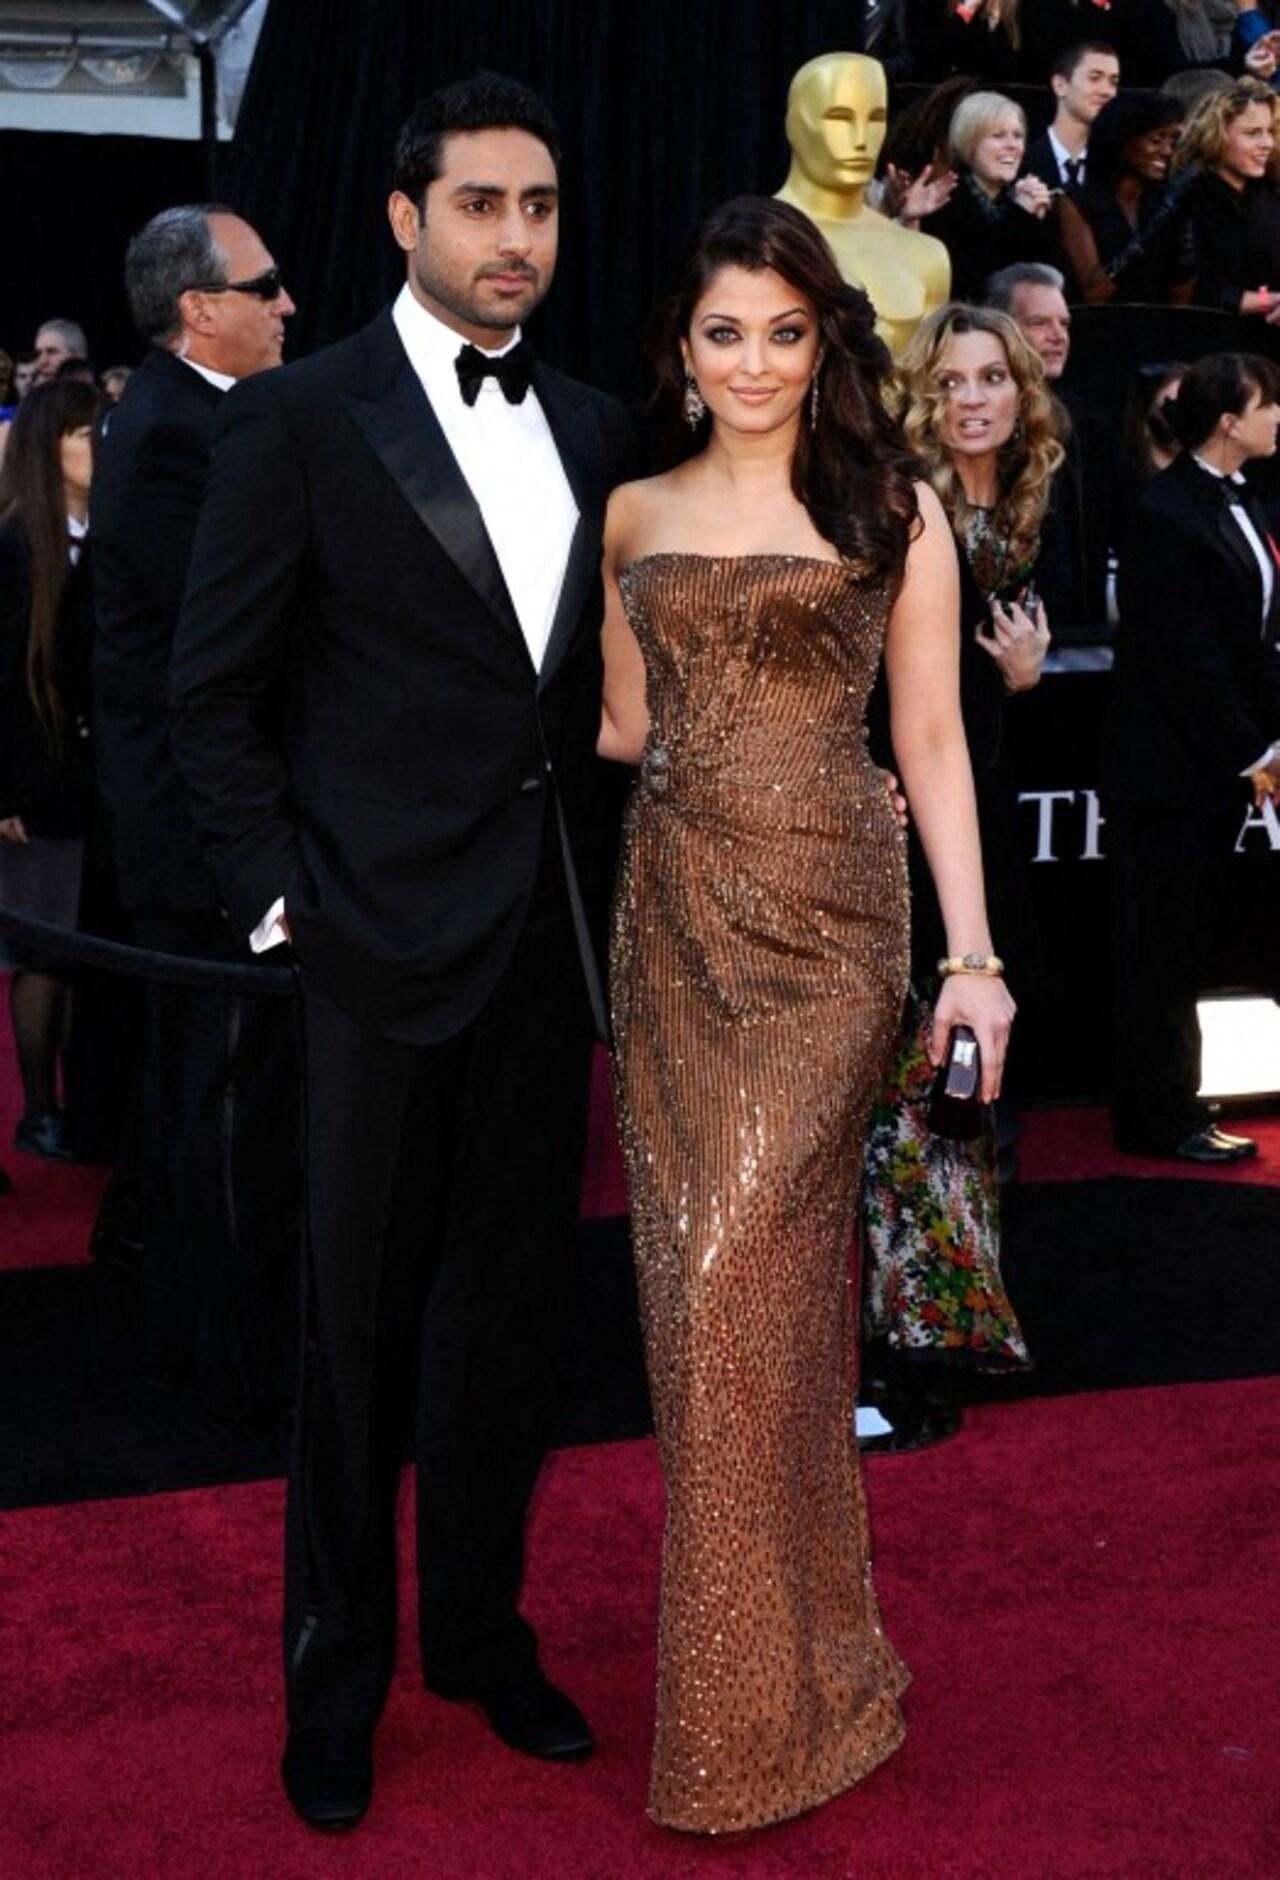 Aishwarya turned heads in a strapless shimmery copper gown as she and Abhishek posed at the 83rd Annual Academy Awards in 2011. 